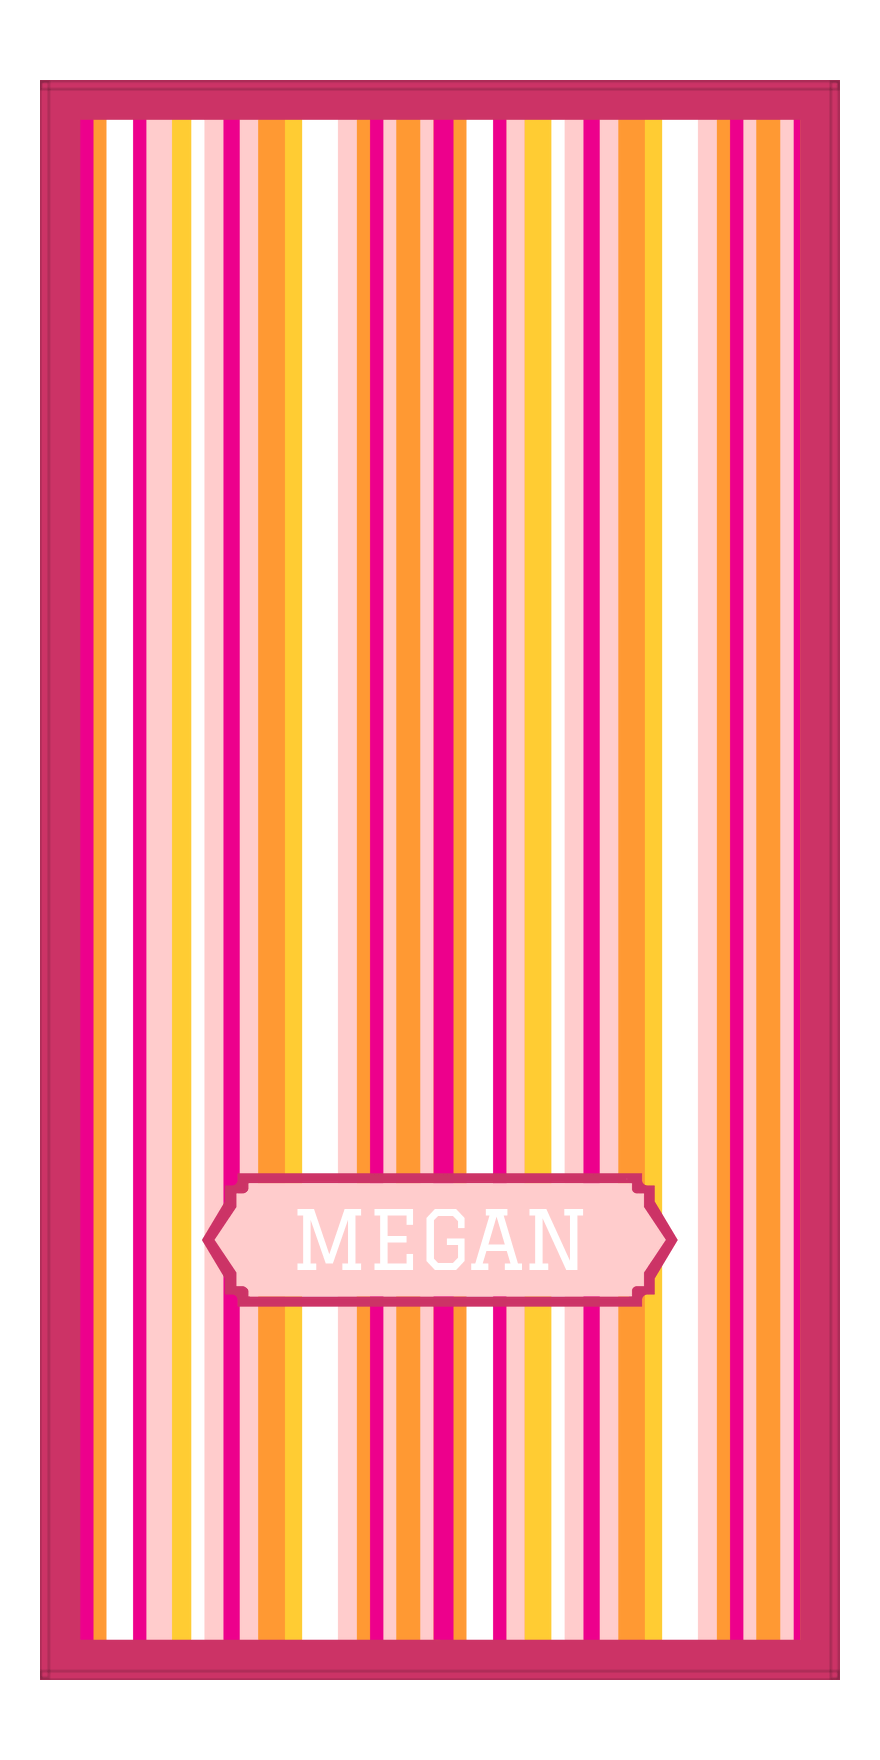 Personalized 5 Color Stripes 2 Repeat Beach Towel - Vertical - Pink and Orange - Oblong Off Center Frame - Front View